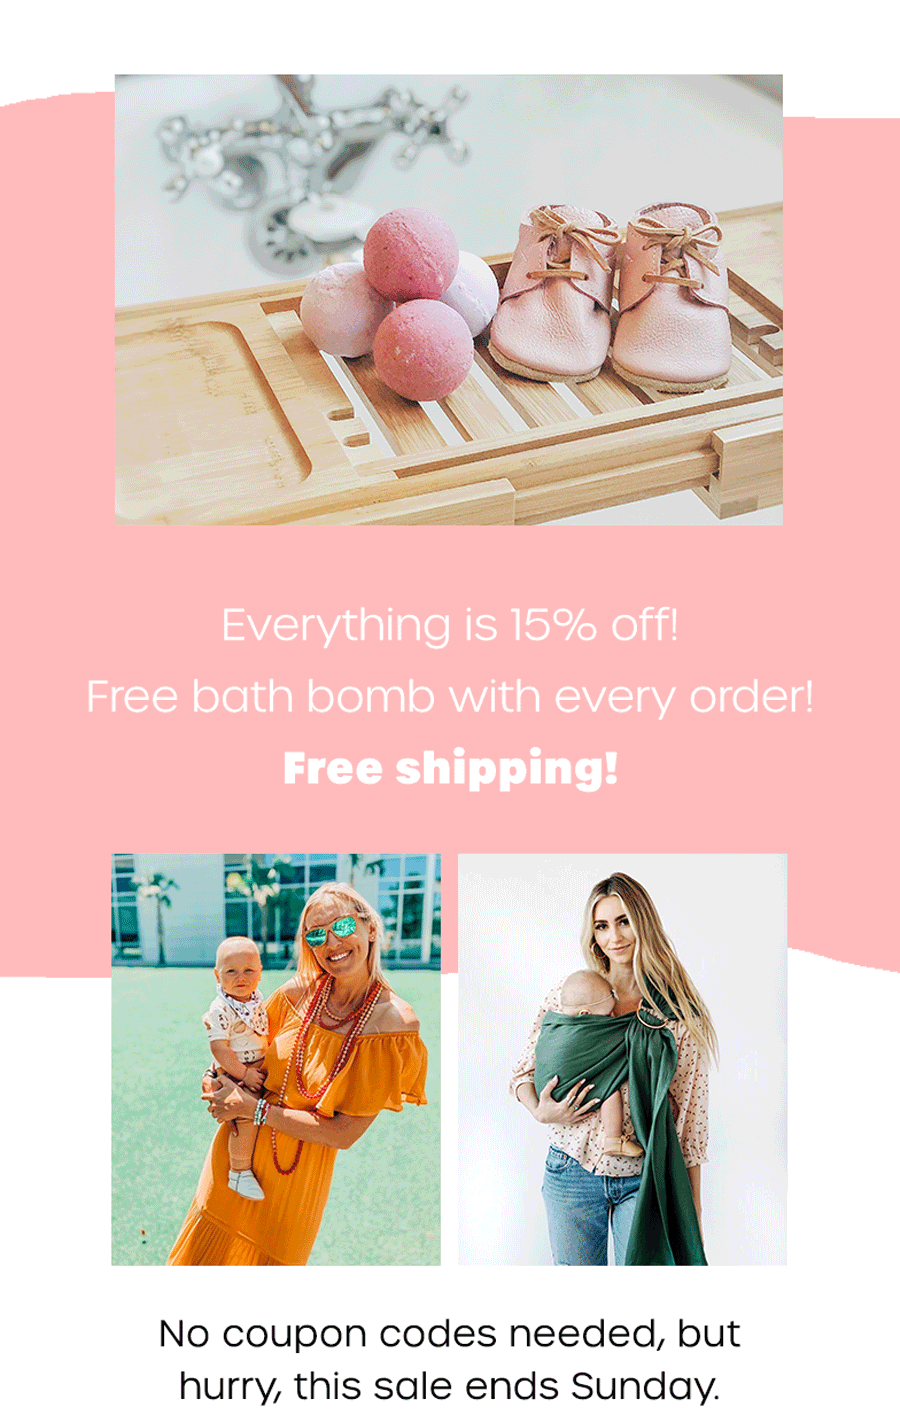 Treat yourself and your baby!